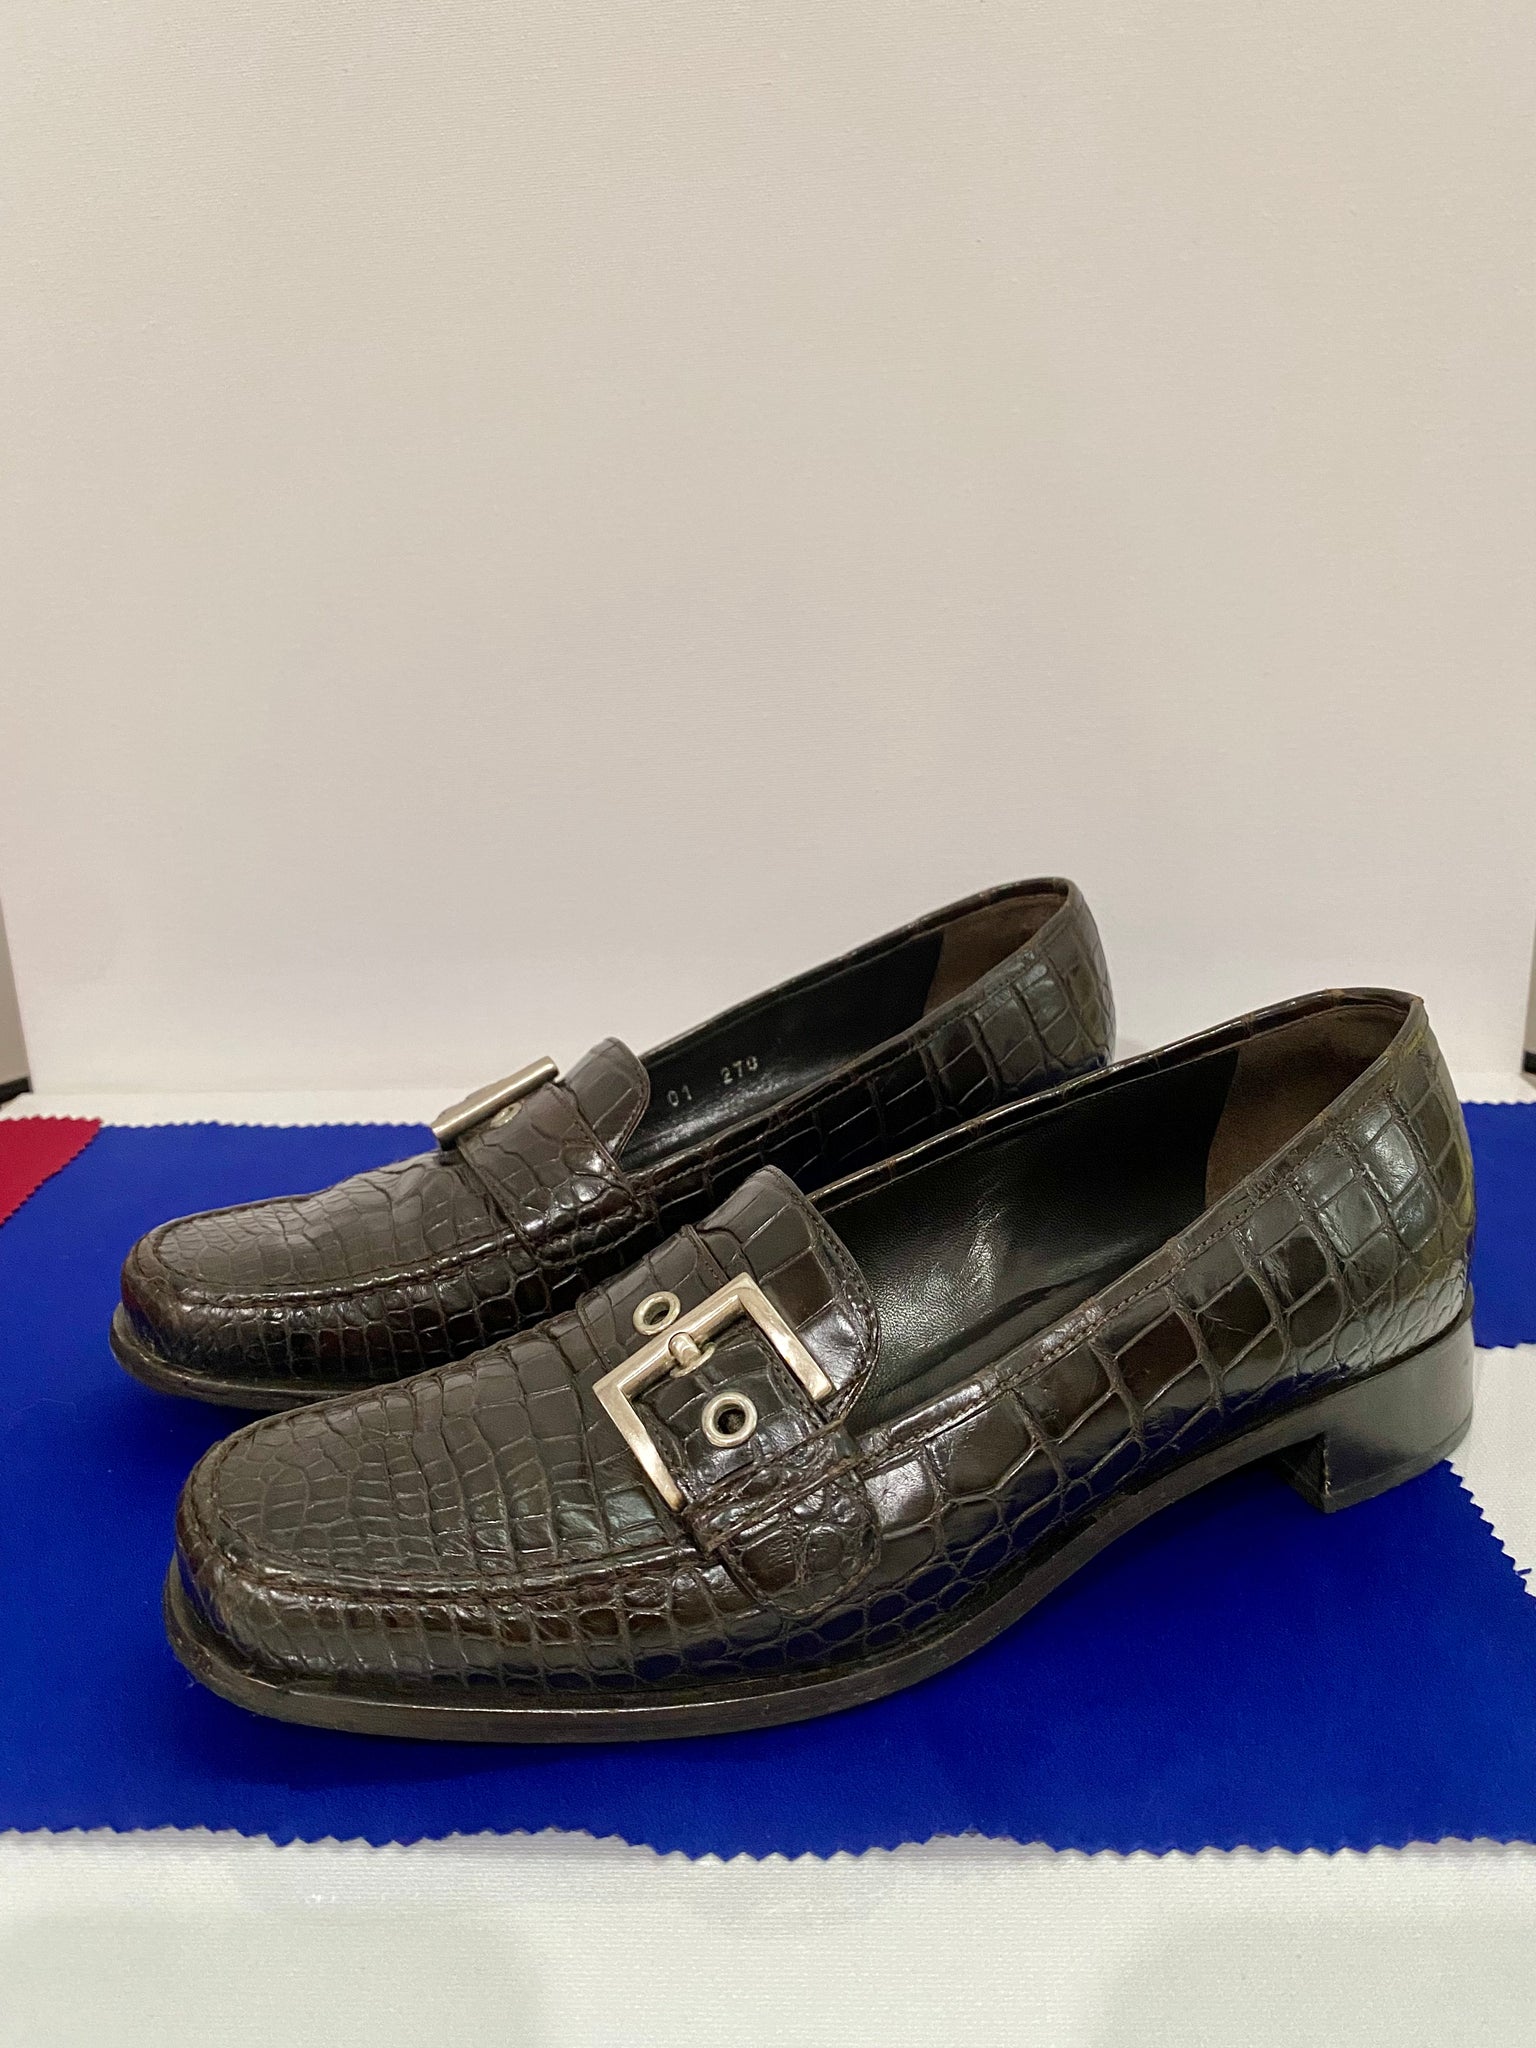 Vintage Prada Crocodile Loafers – For the Ages